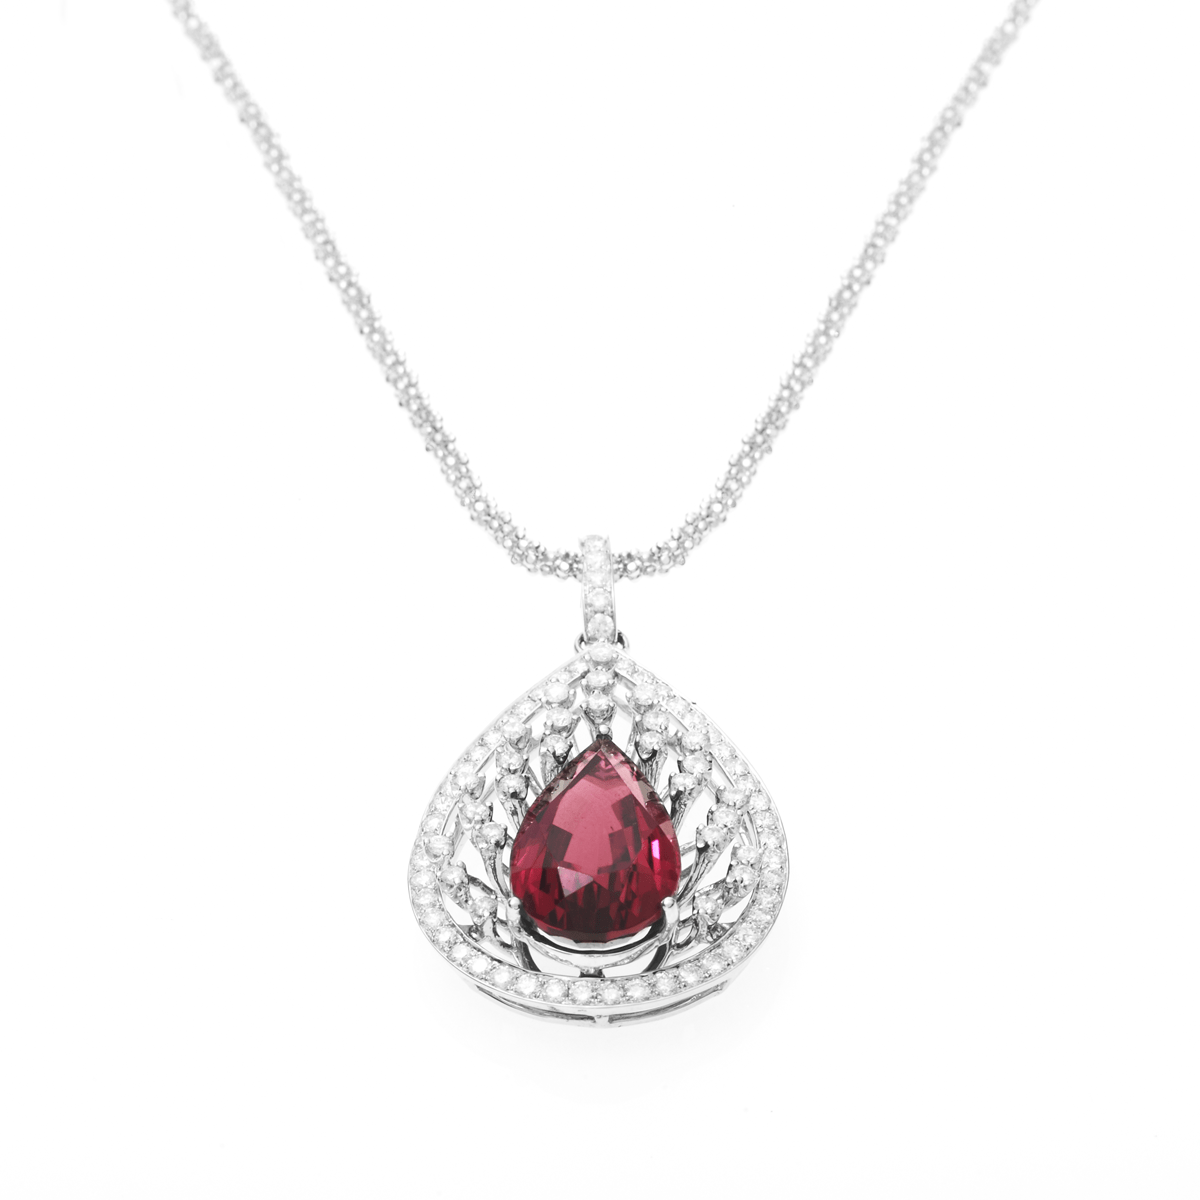 BLOOD TOURMALINE PENDANT - HIBISCUS - Chris Aire Fine Jewelry & Timepieces